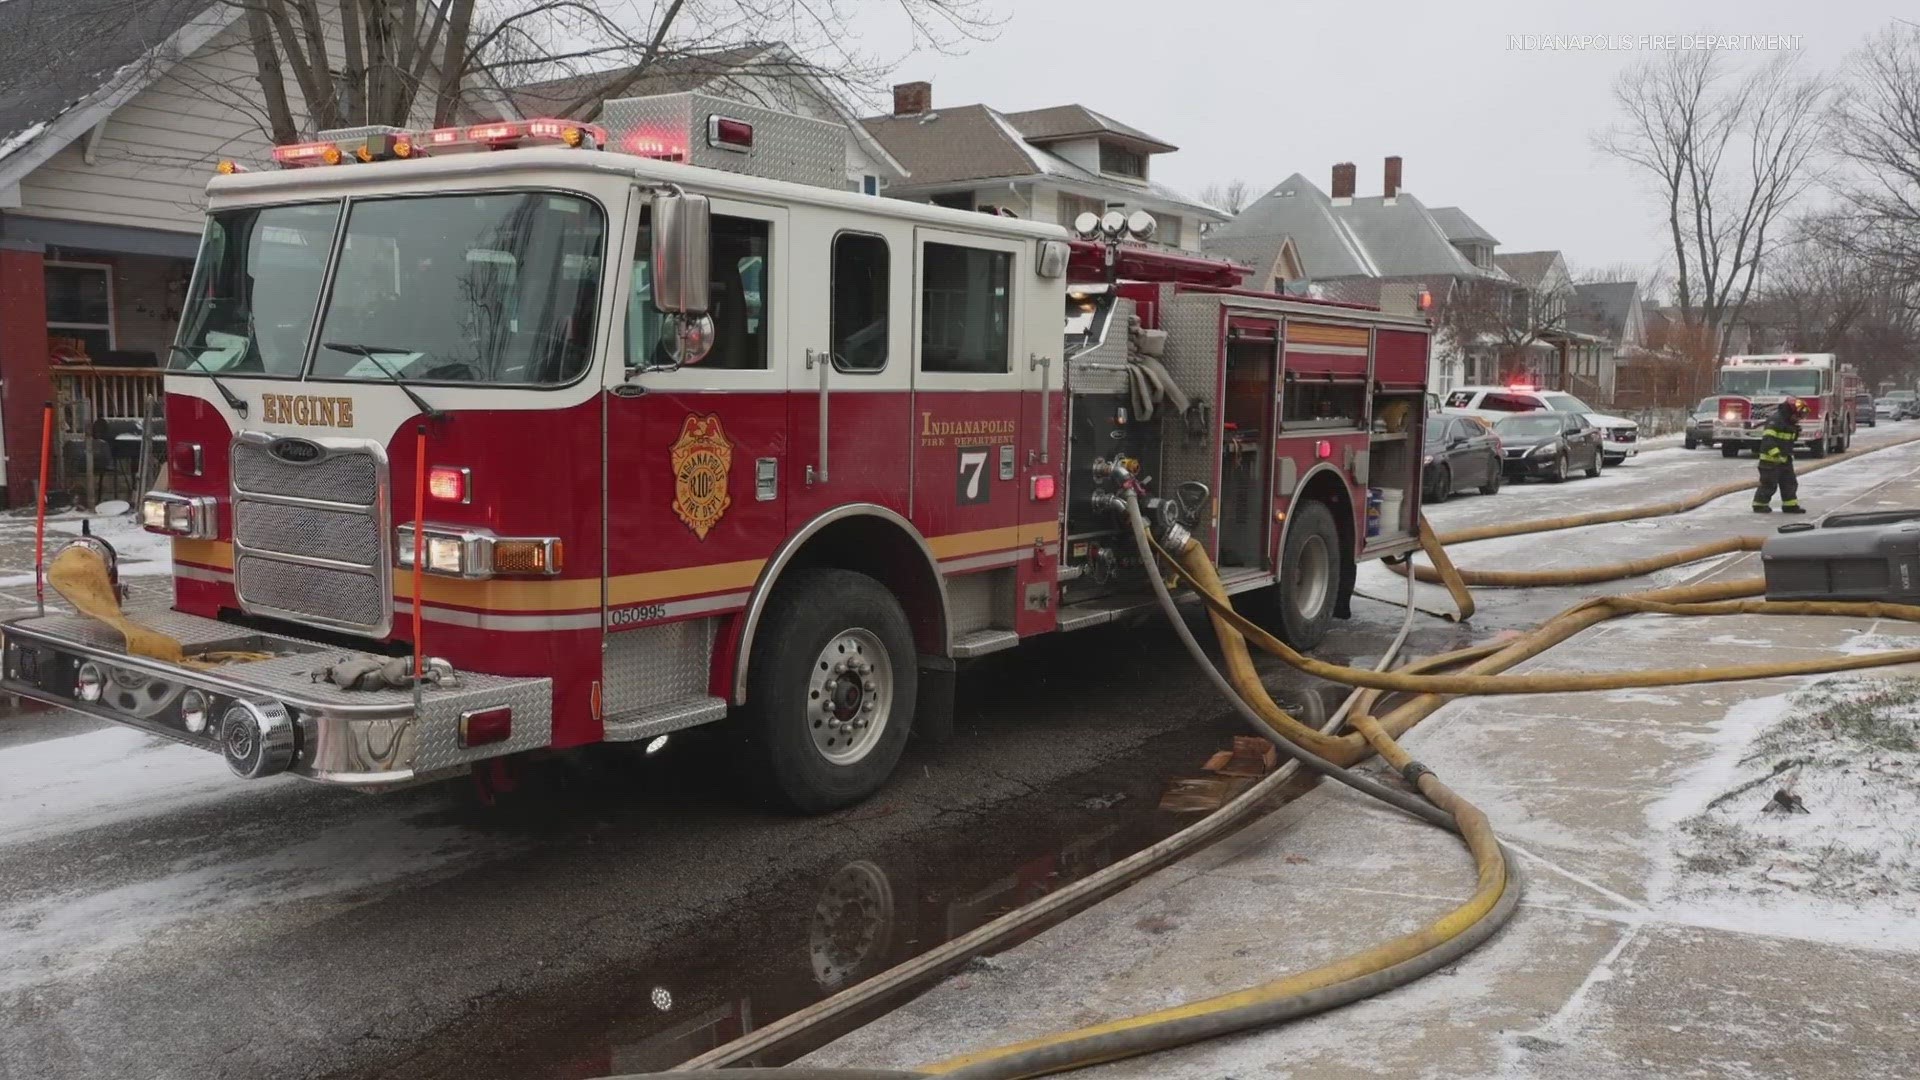 13News reporter Anna Chalker talked with IFD Battalion Chief Rita Reith about how the Indianapolis Fire Department fights fires in extreme cold.